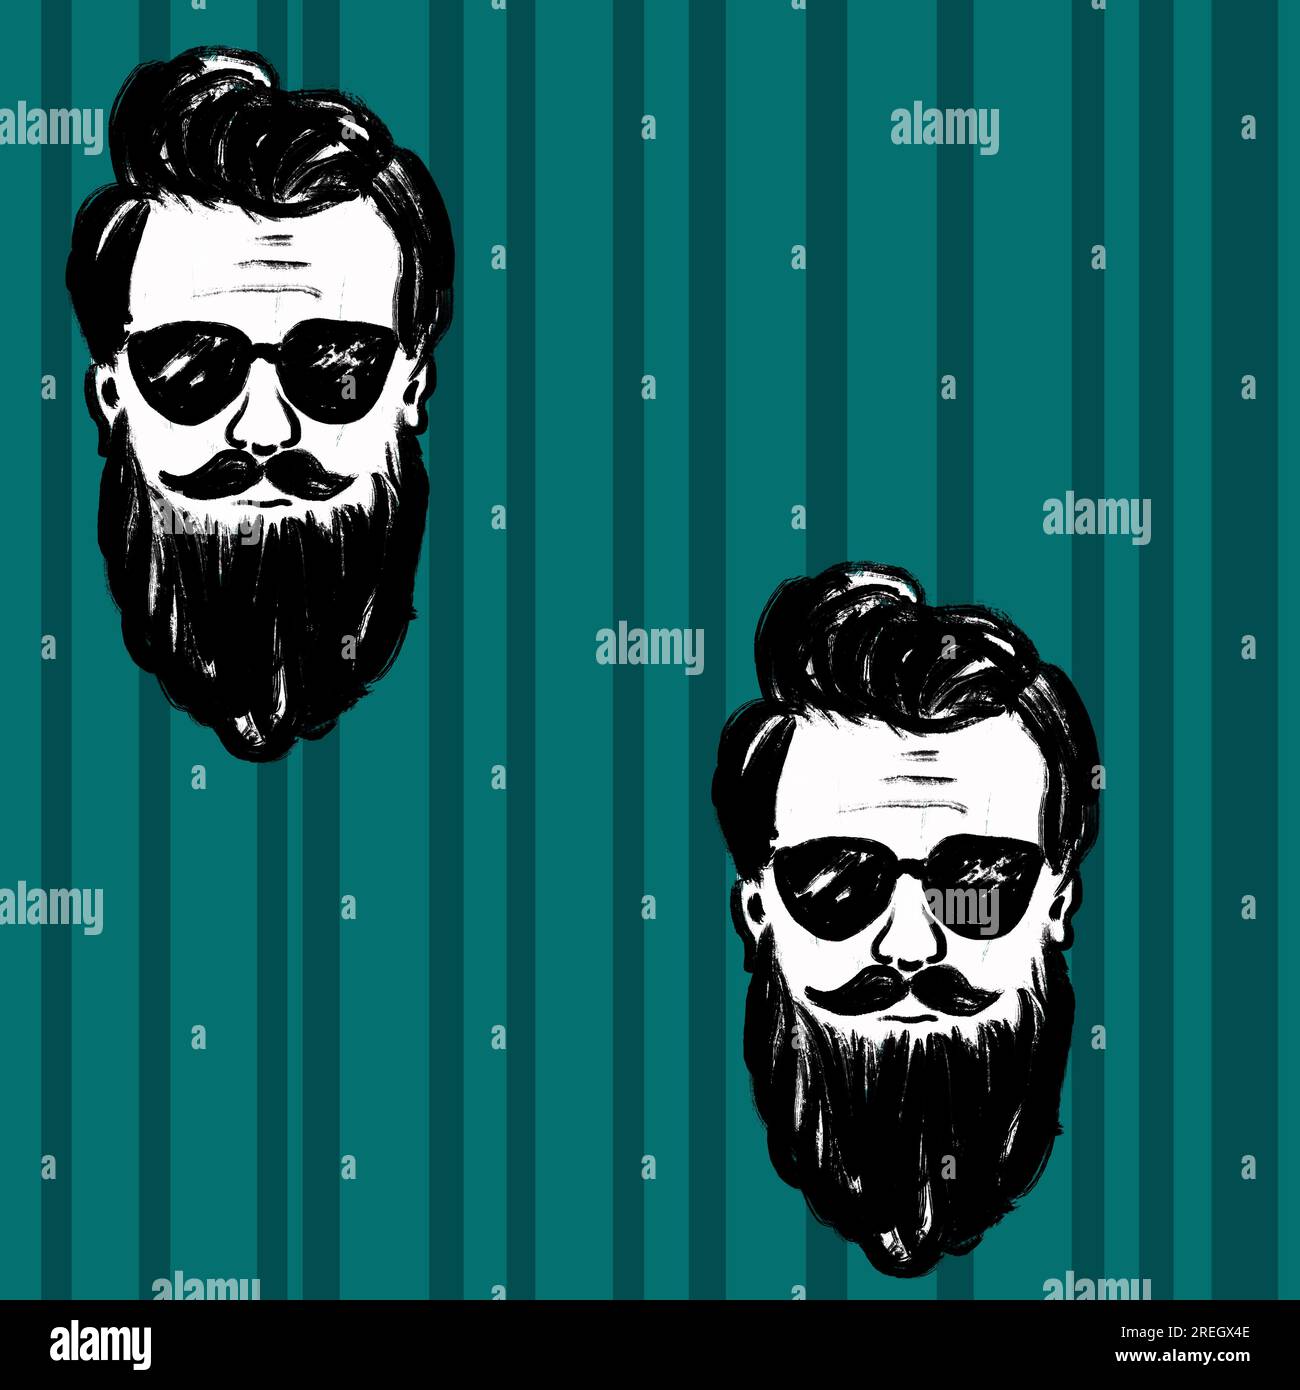 Hand drawn seamless pattern with man men male faces inblack white on striped teal green background. Masculine minimalist retro vintage design for barbers husband gift, beard mustache glasses trendy fashion Stock Photo